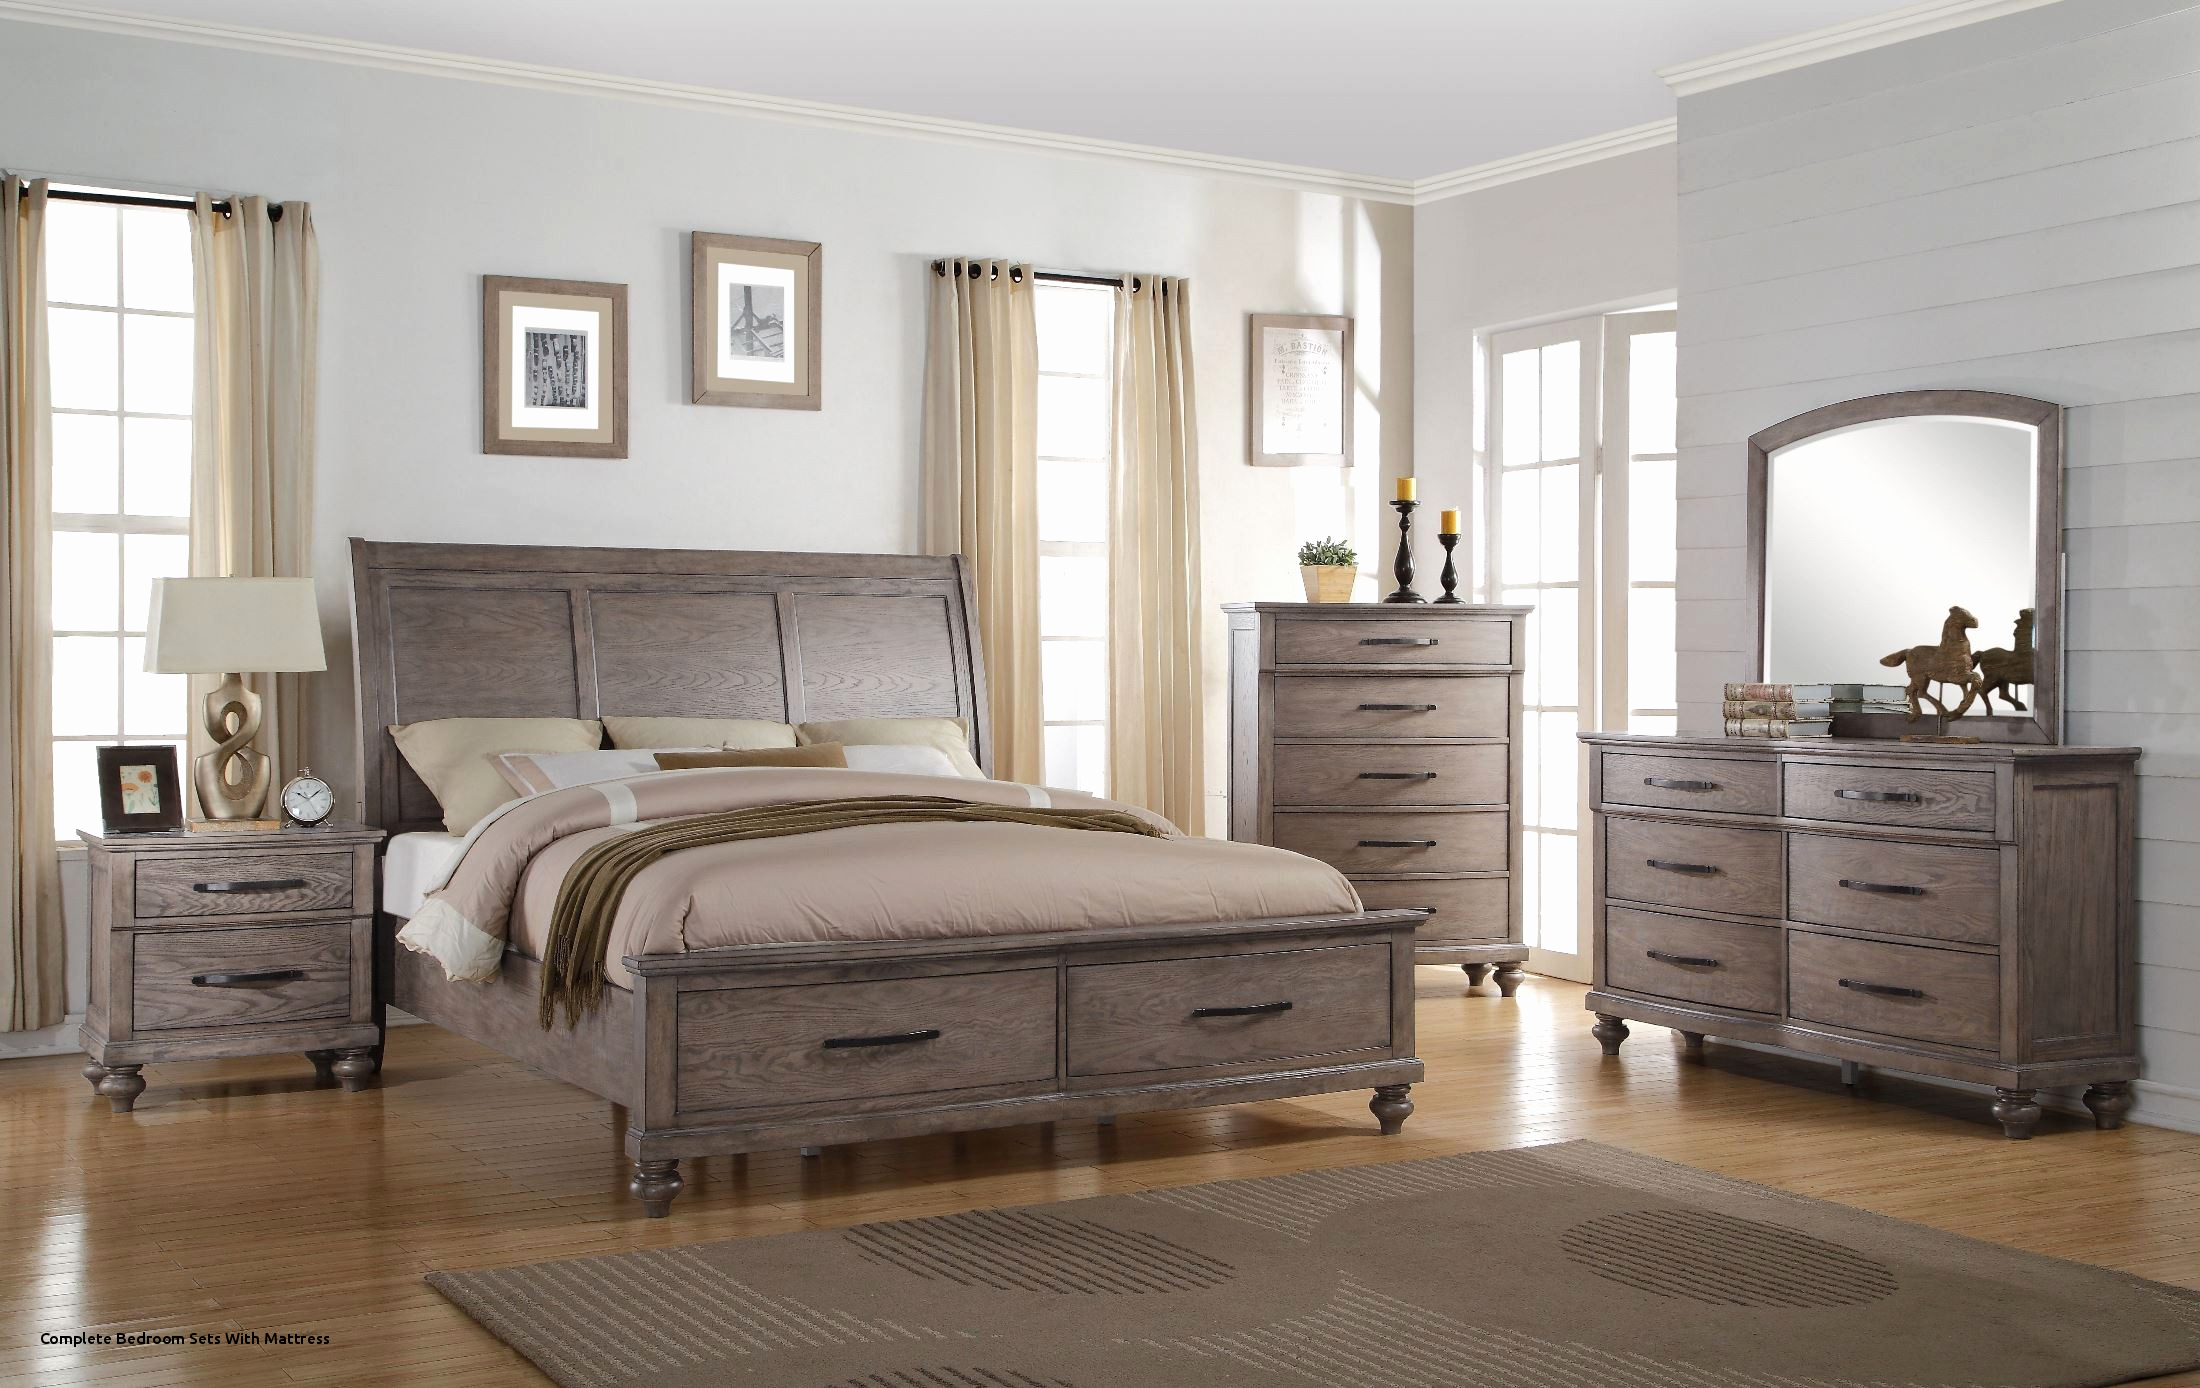 Toddler Bedroom Furniture Inspirational Complete Bedroom Sets With pertaining to dimensions 2200 X 1388